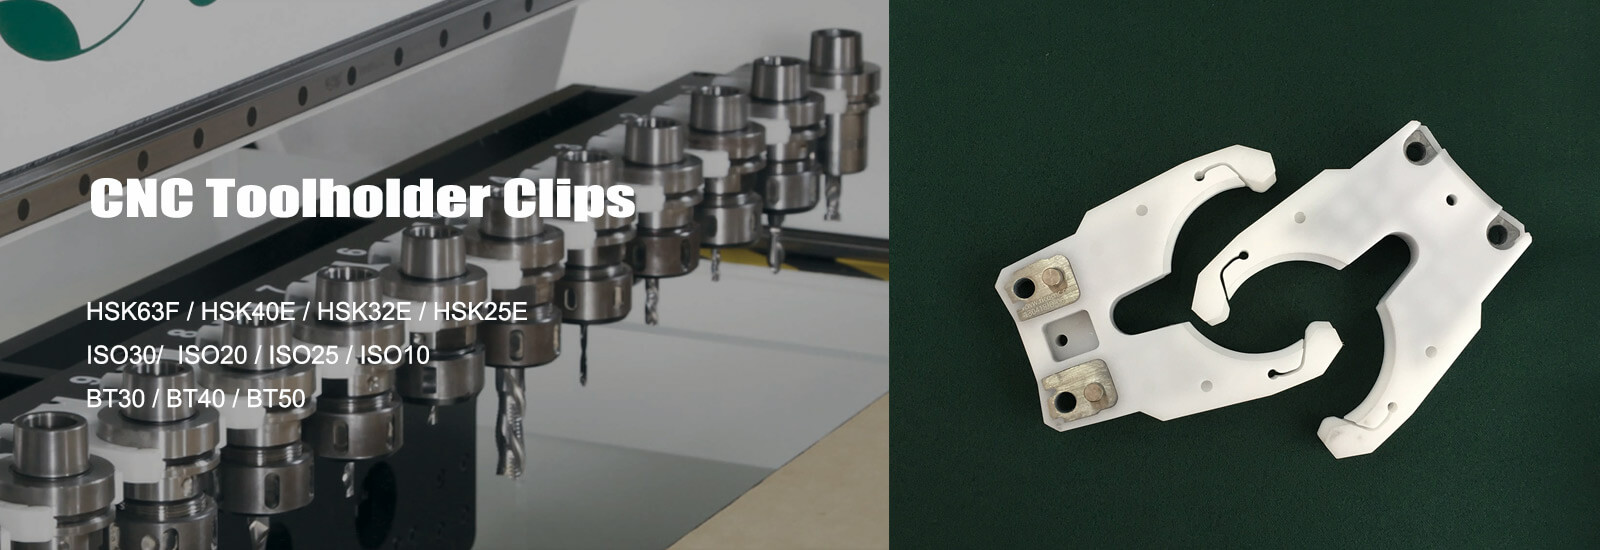 CNC TOOLHOLDER CLIPS